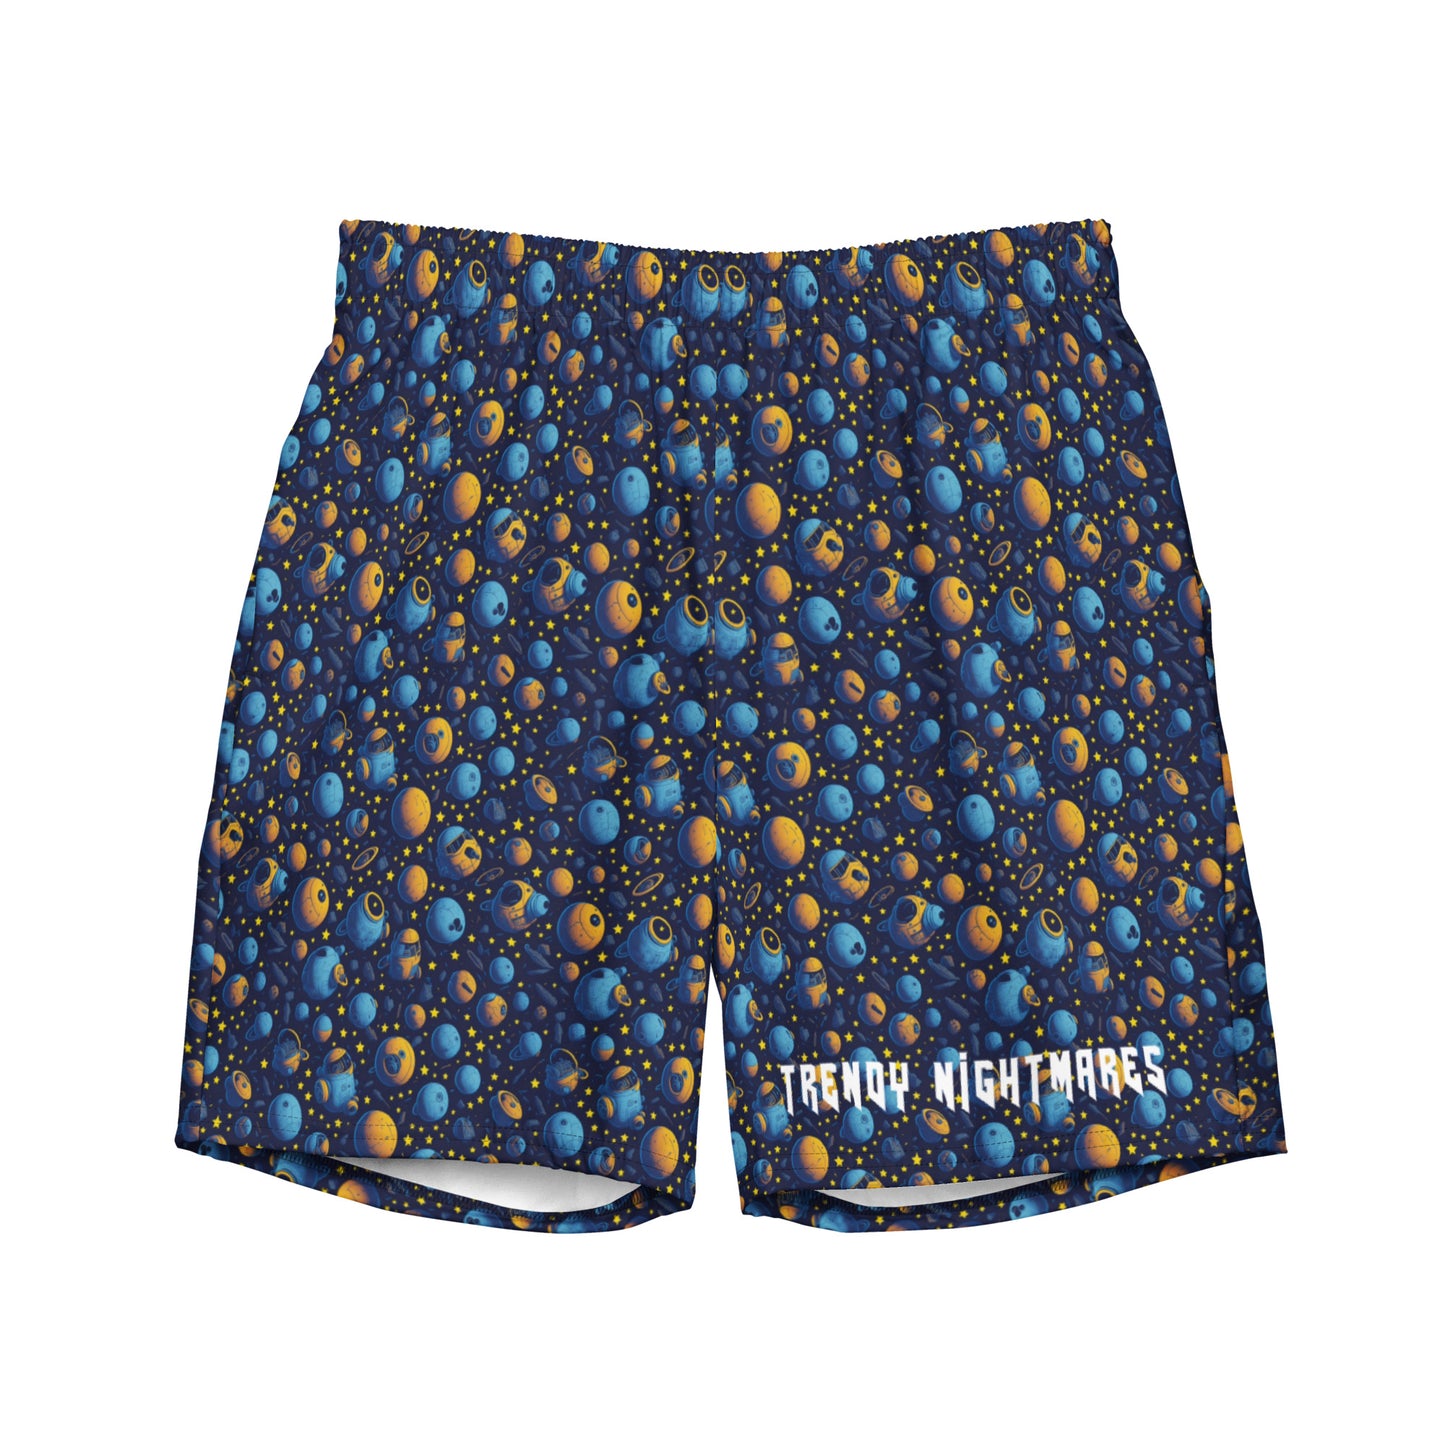 Planets and Drones Men's swim trunks